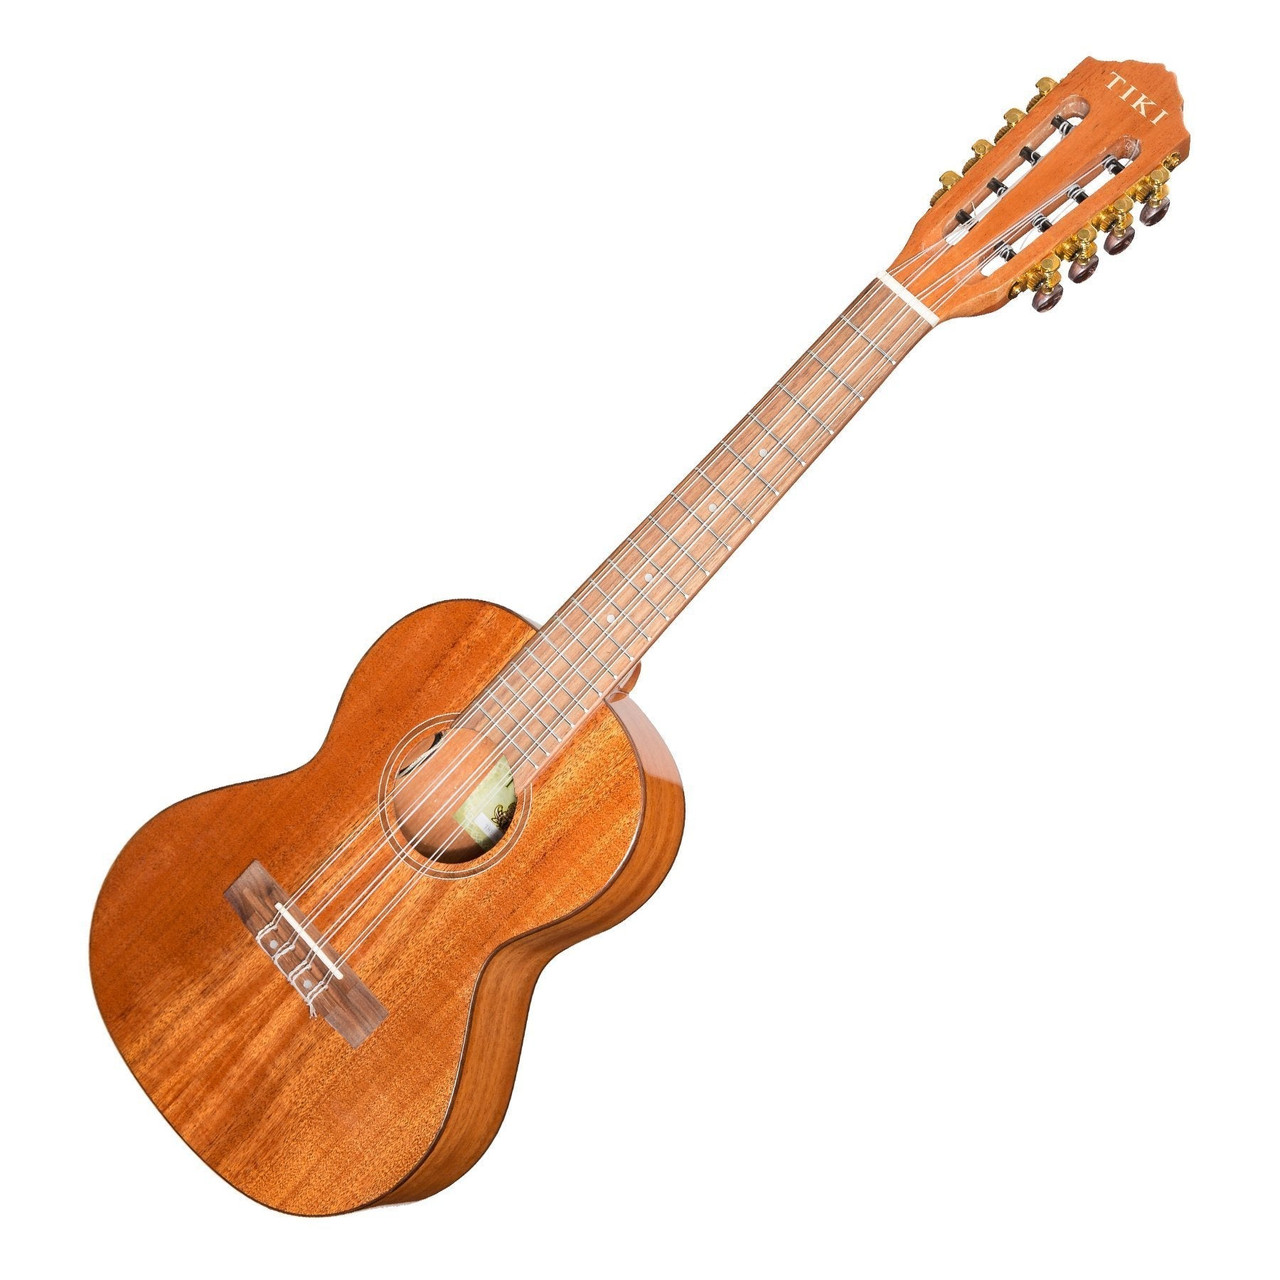 https://cdn.shopify.com/s/files/1/1636/6967/products/Tiki-8-String-Mahogany-Solid-Top-Electric-Ukulele-with-Gig-Bag-Natural-Gloss-T8E-NGL-3_1f78a4e3-2113-45d5-90c7-3062d62b9c8d.jpg?v=1643140711